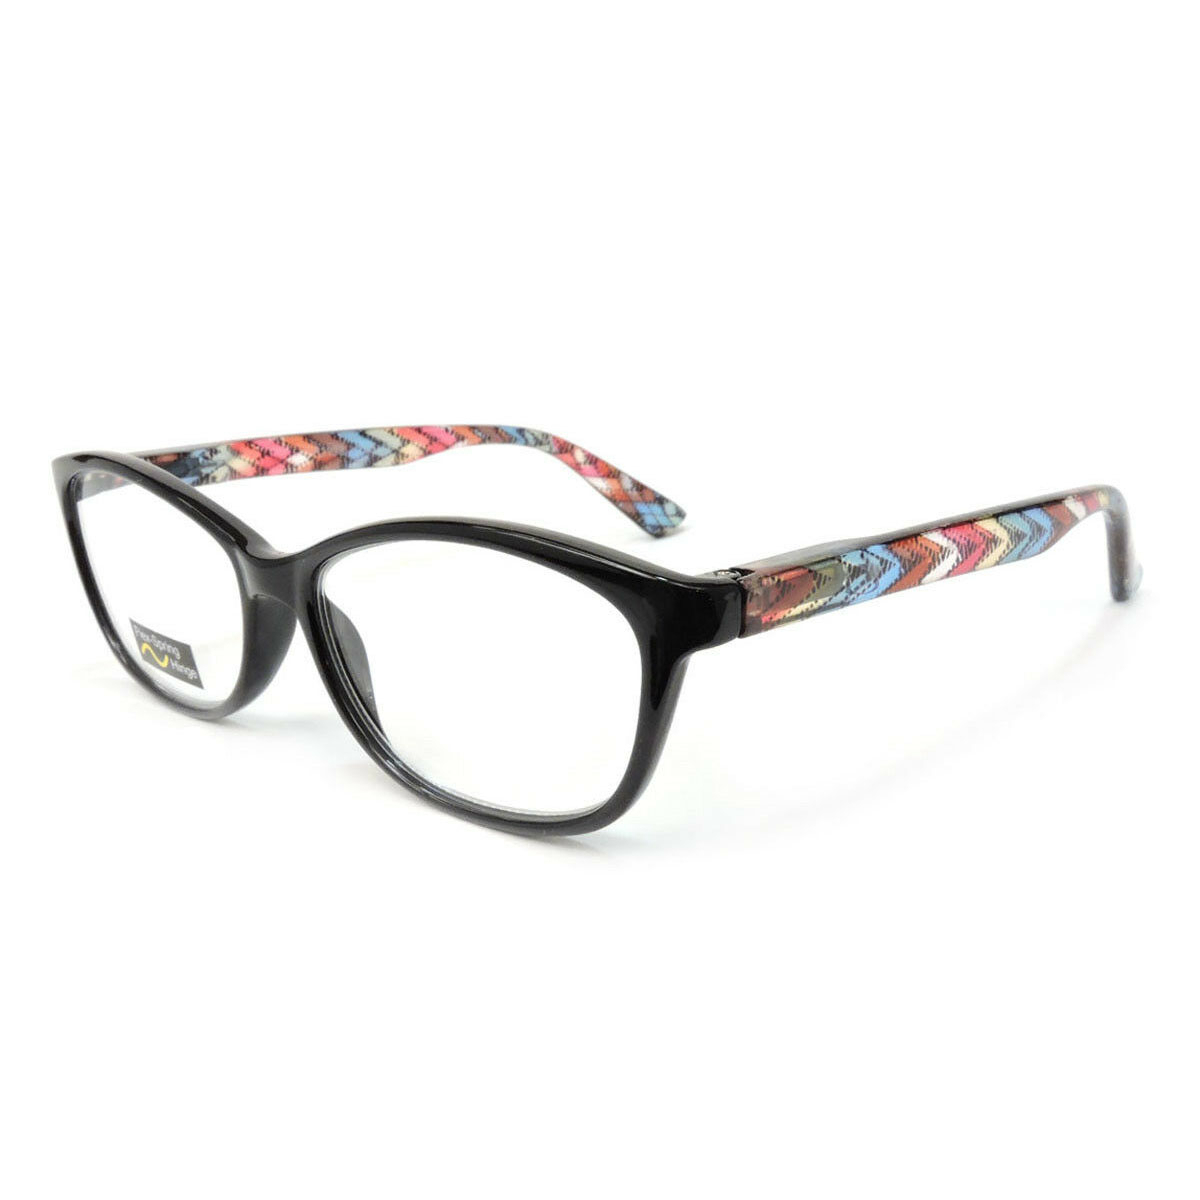 Classic Frame Reading Glasses Colorful Arms Retro Vintage Style - Red, +2.25